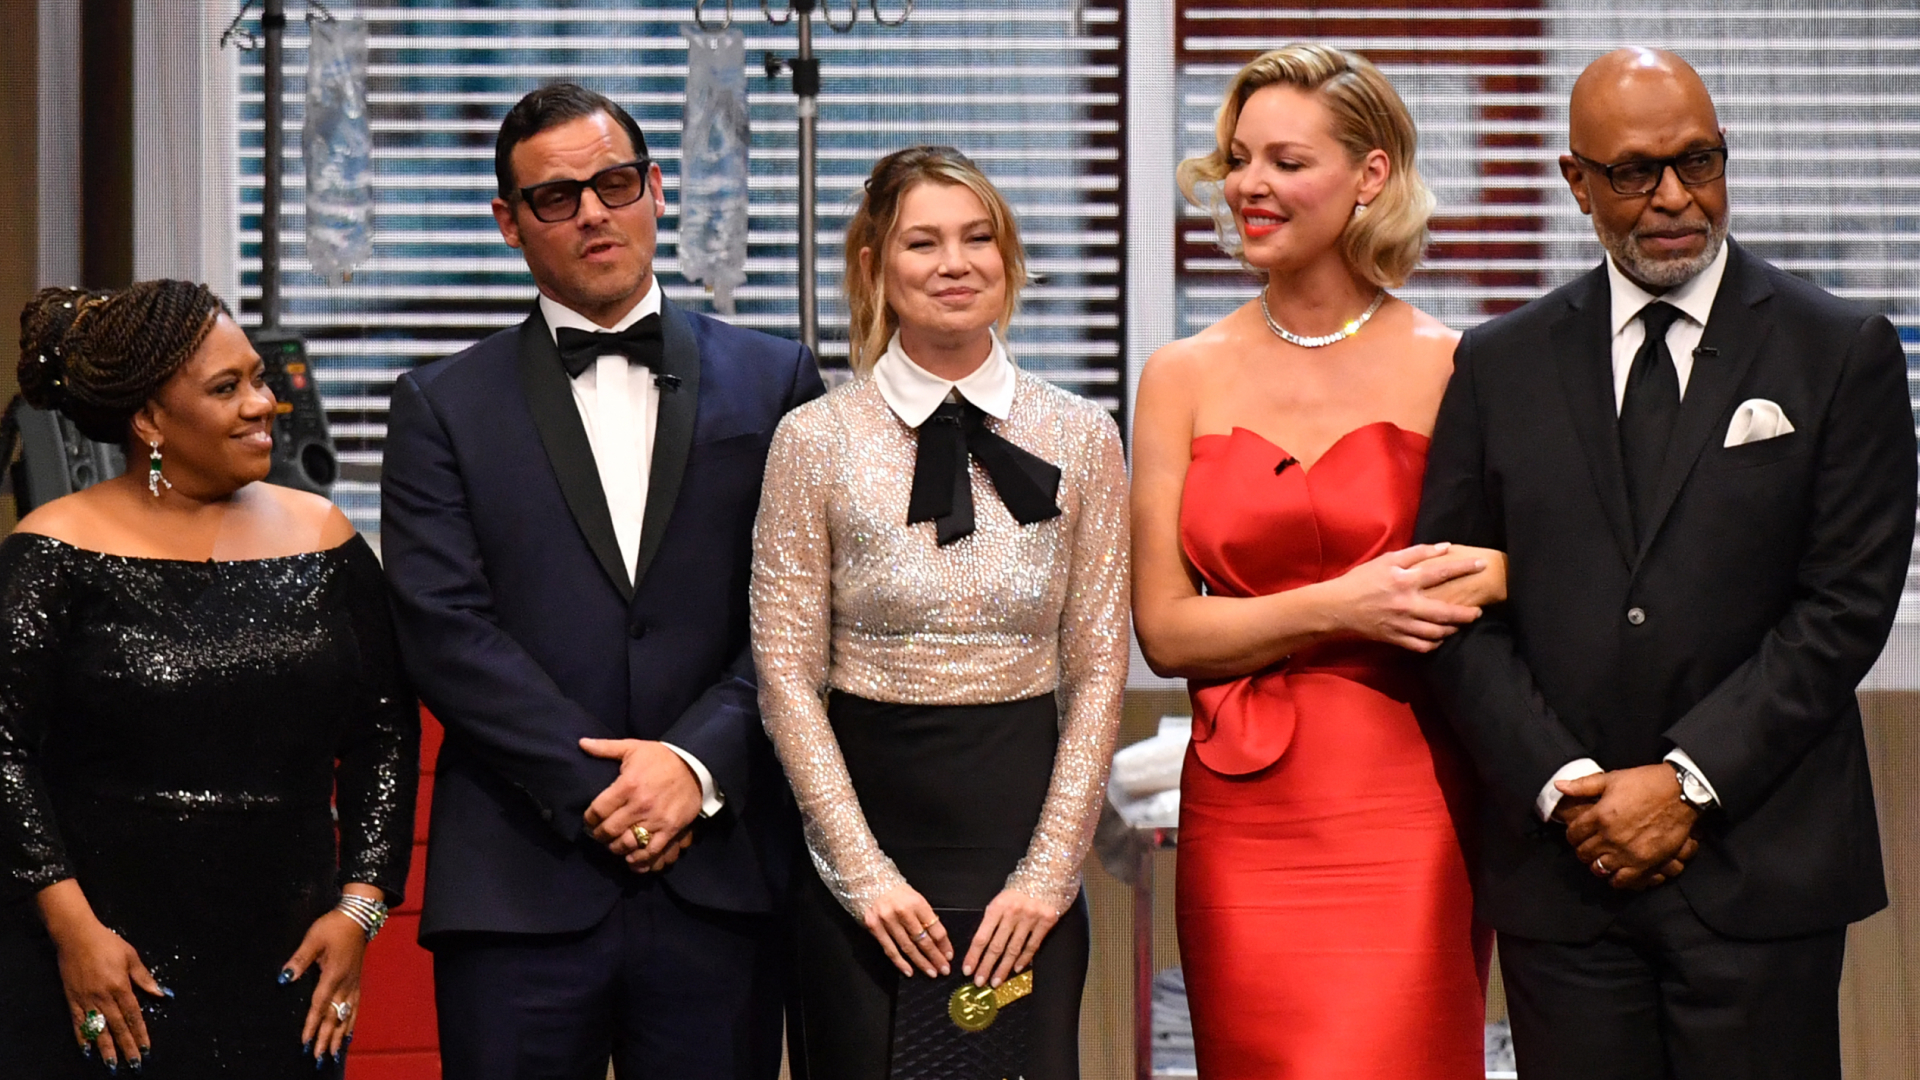 The 'Grey's Anatomy' Cast Reunited at the Emmys—Be Still, My Heart